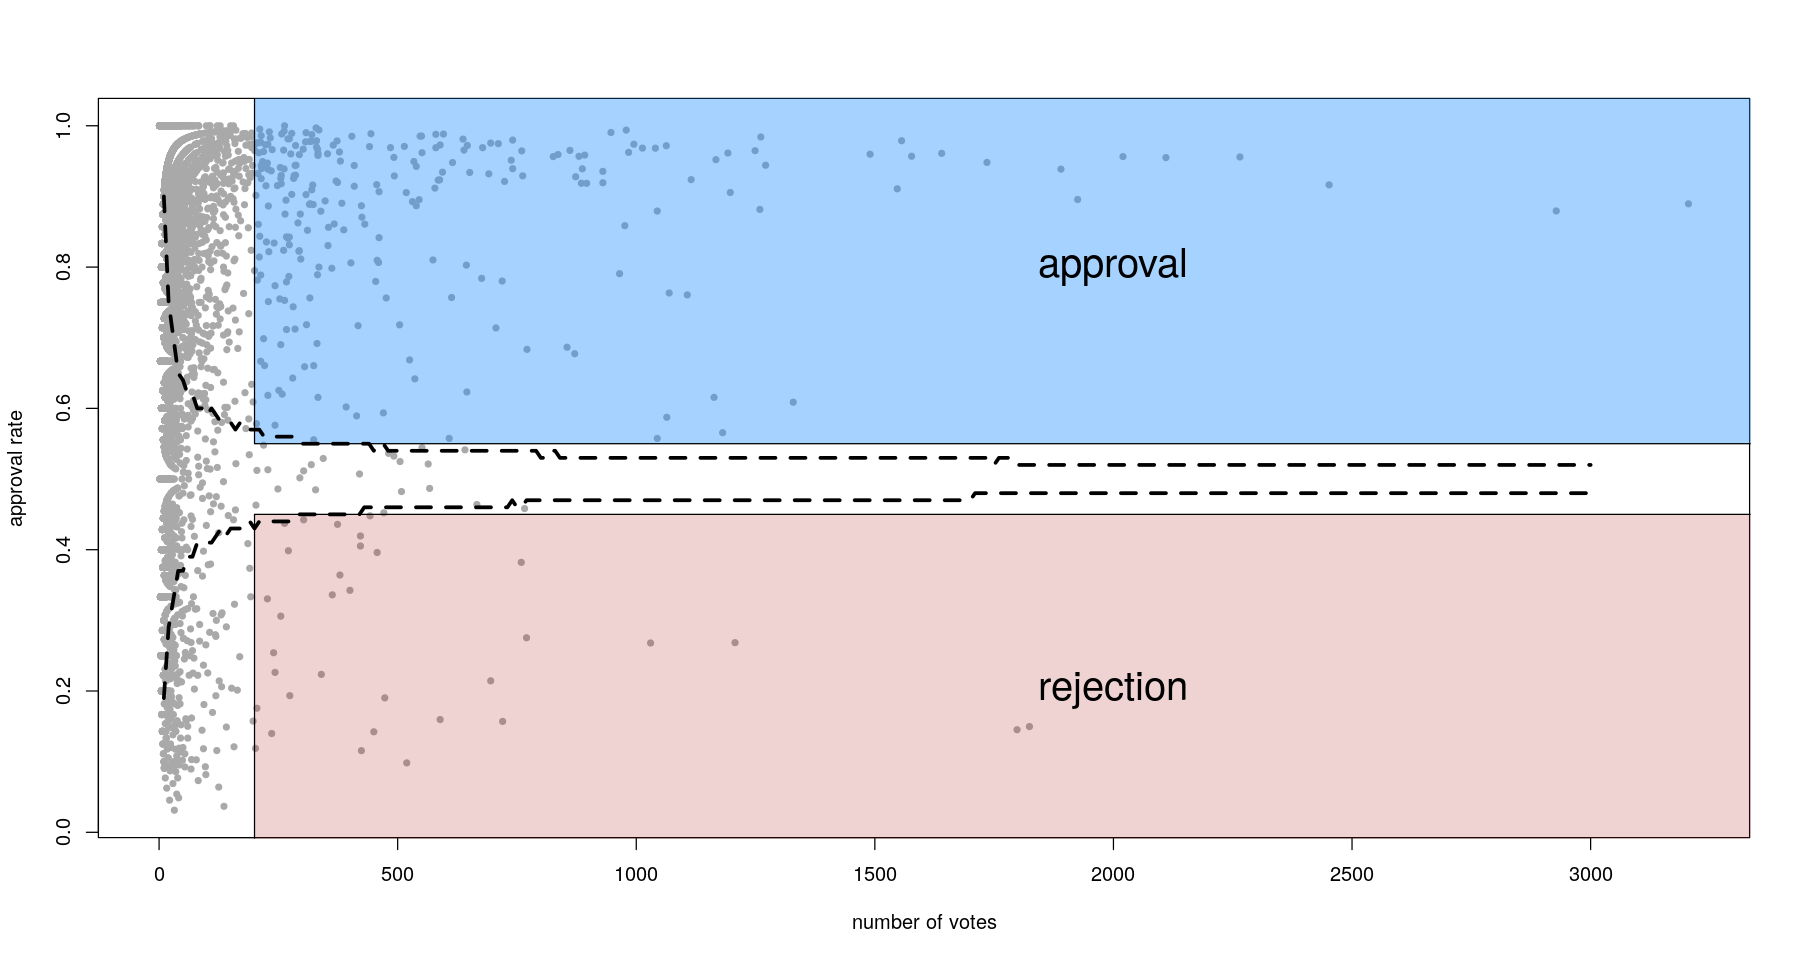 For most proposals, there is enough statistical power to determine approval or rejection. Dashed lines represent significance in a one-sided proportion test vs 50%.